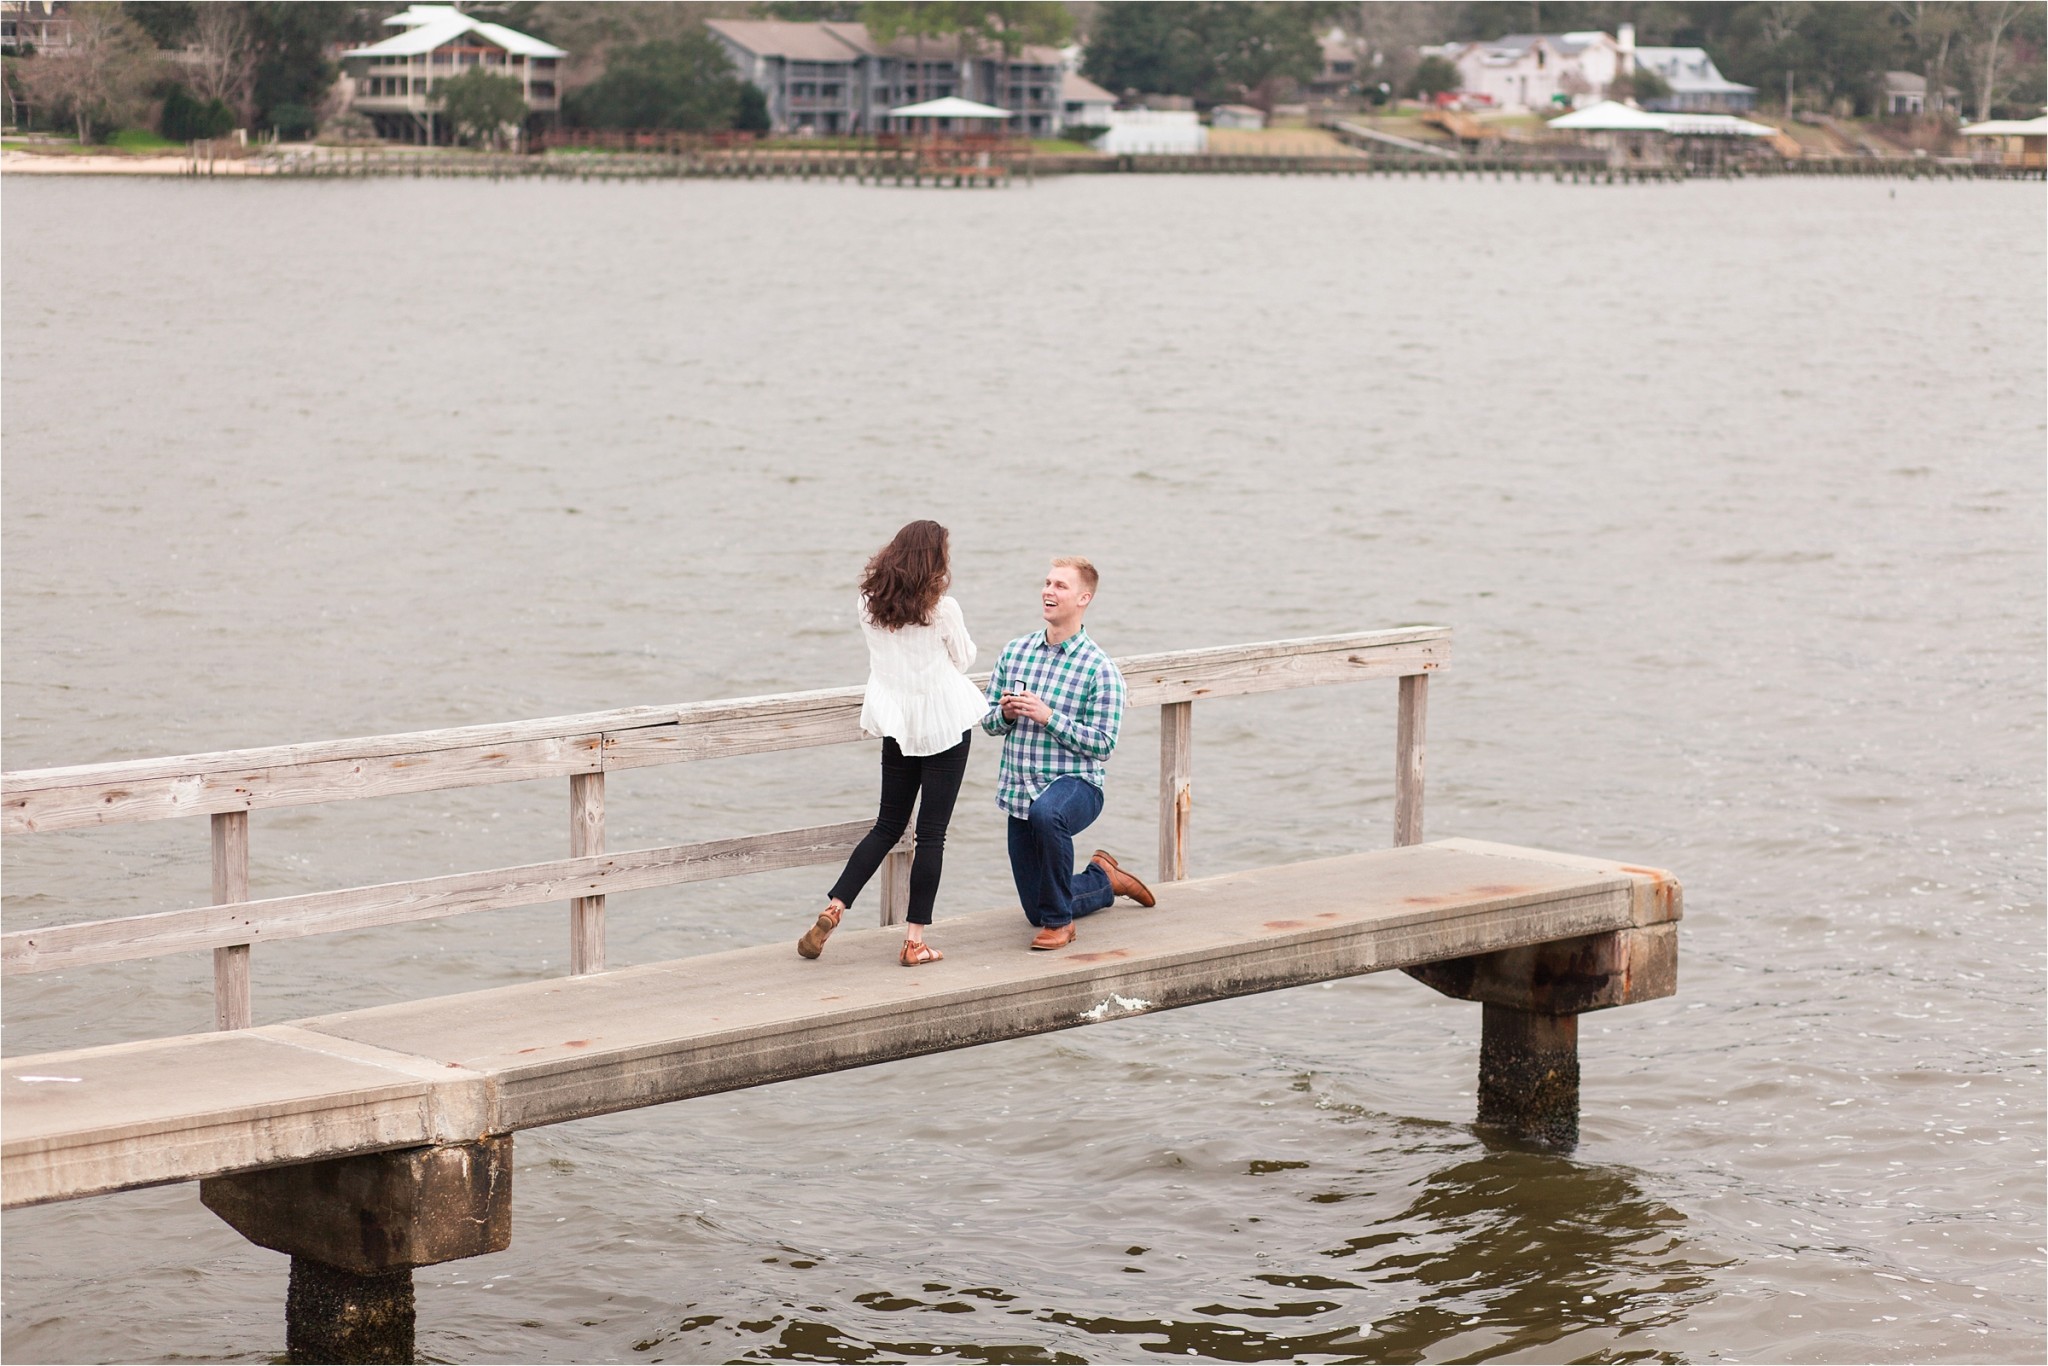 Missy_Eric_Proposal_at_the_Fairhope_pier_Alabama-60